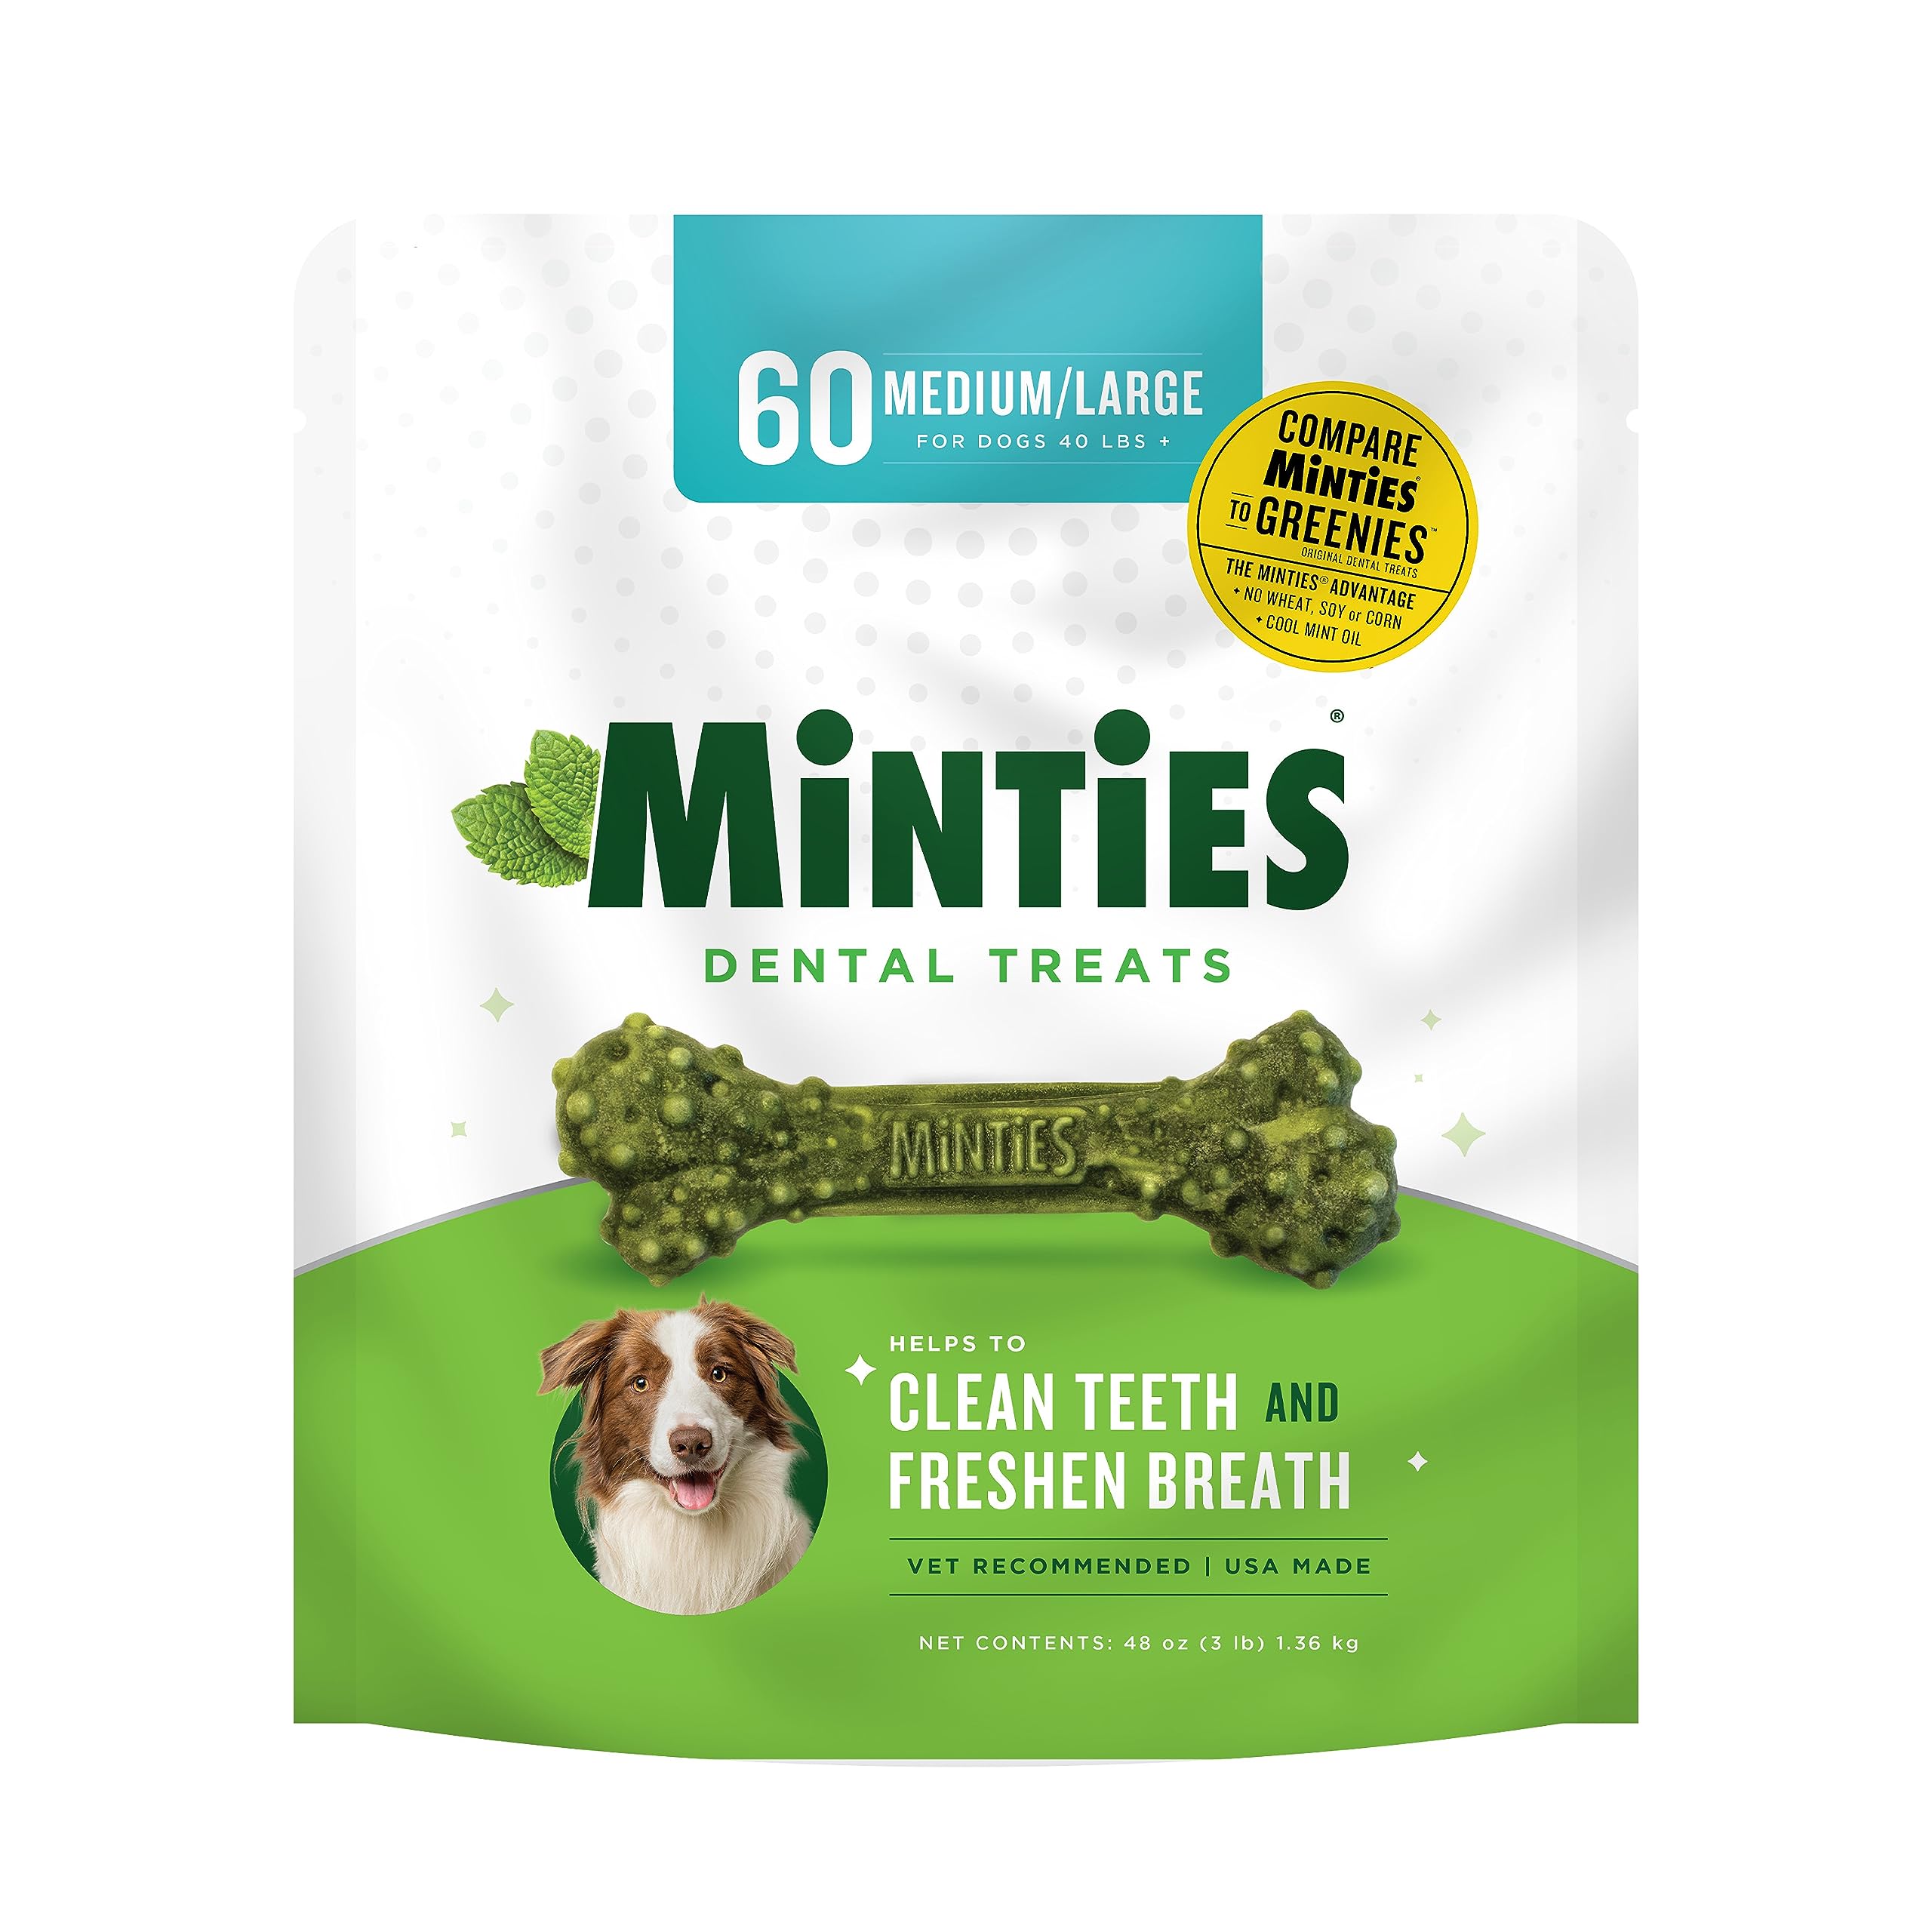 Minties Dental Chews for Dogs, Vet-Recommended Mint-Flavored Dental Treats for Medium/Large Dogs over 40 lbs, Dental Bones Clean